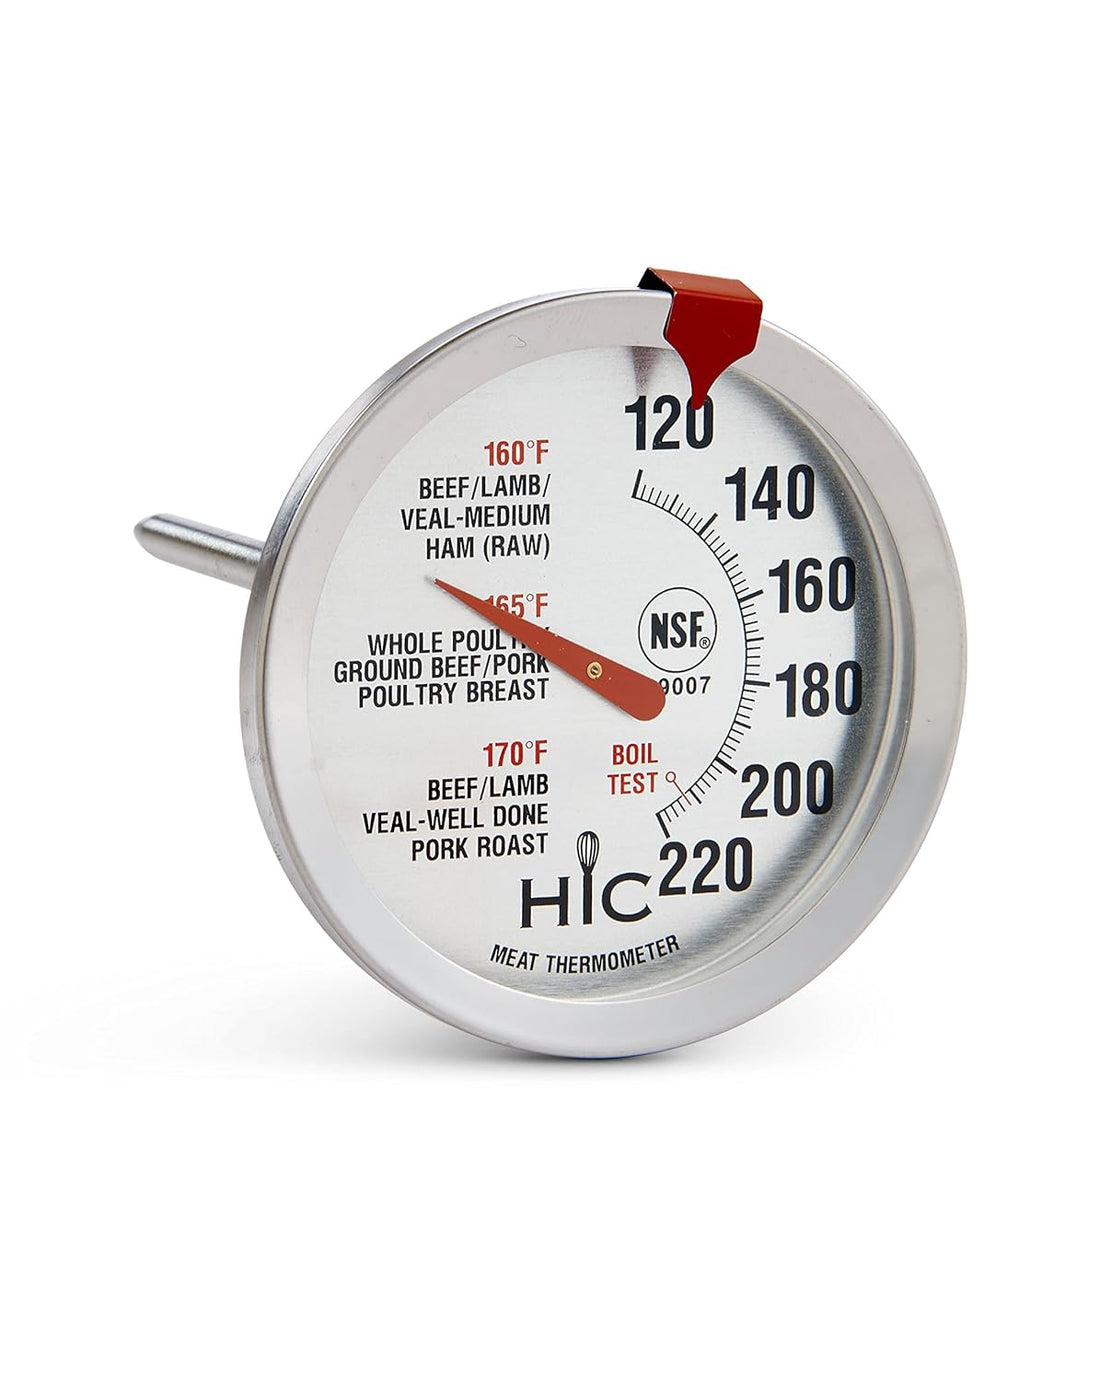 HIC Roasting Meat Poultry Ham Turkey Grill Thermometer, Oven Safe, Large 2-Inch Easy-Read Face, Stainless Steel Stem and Housing